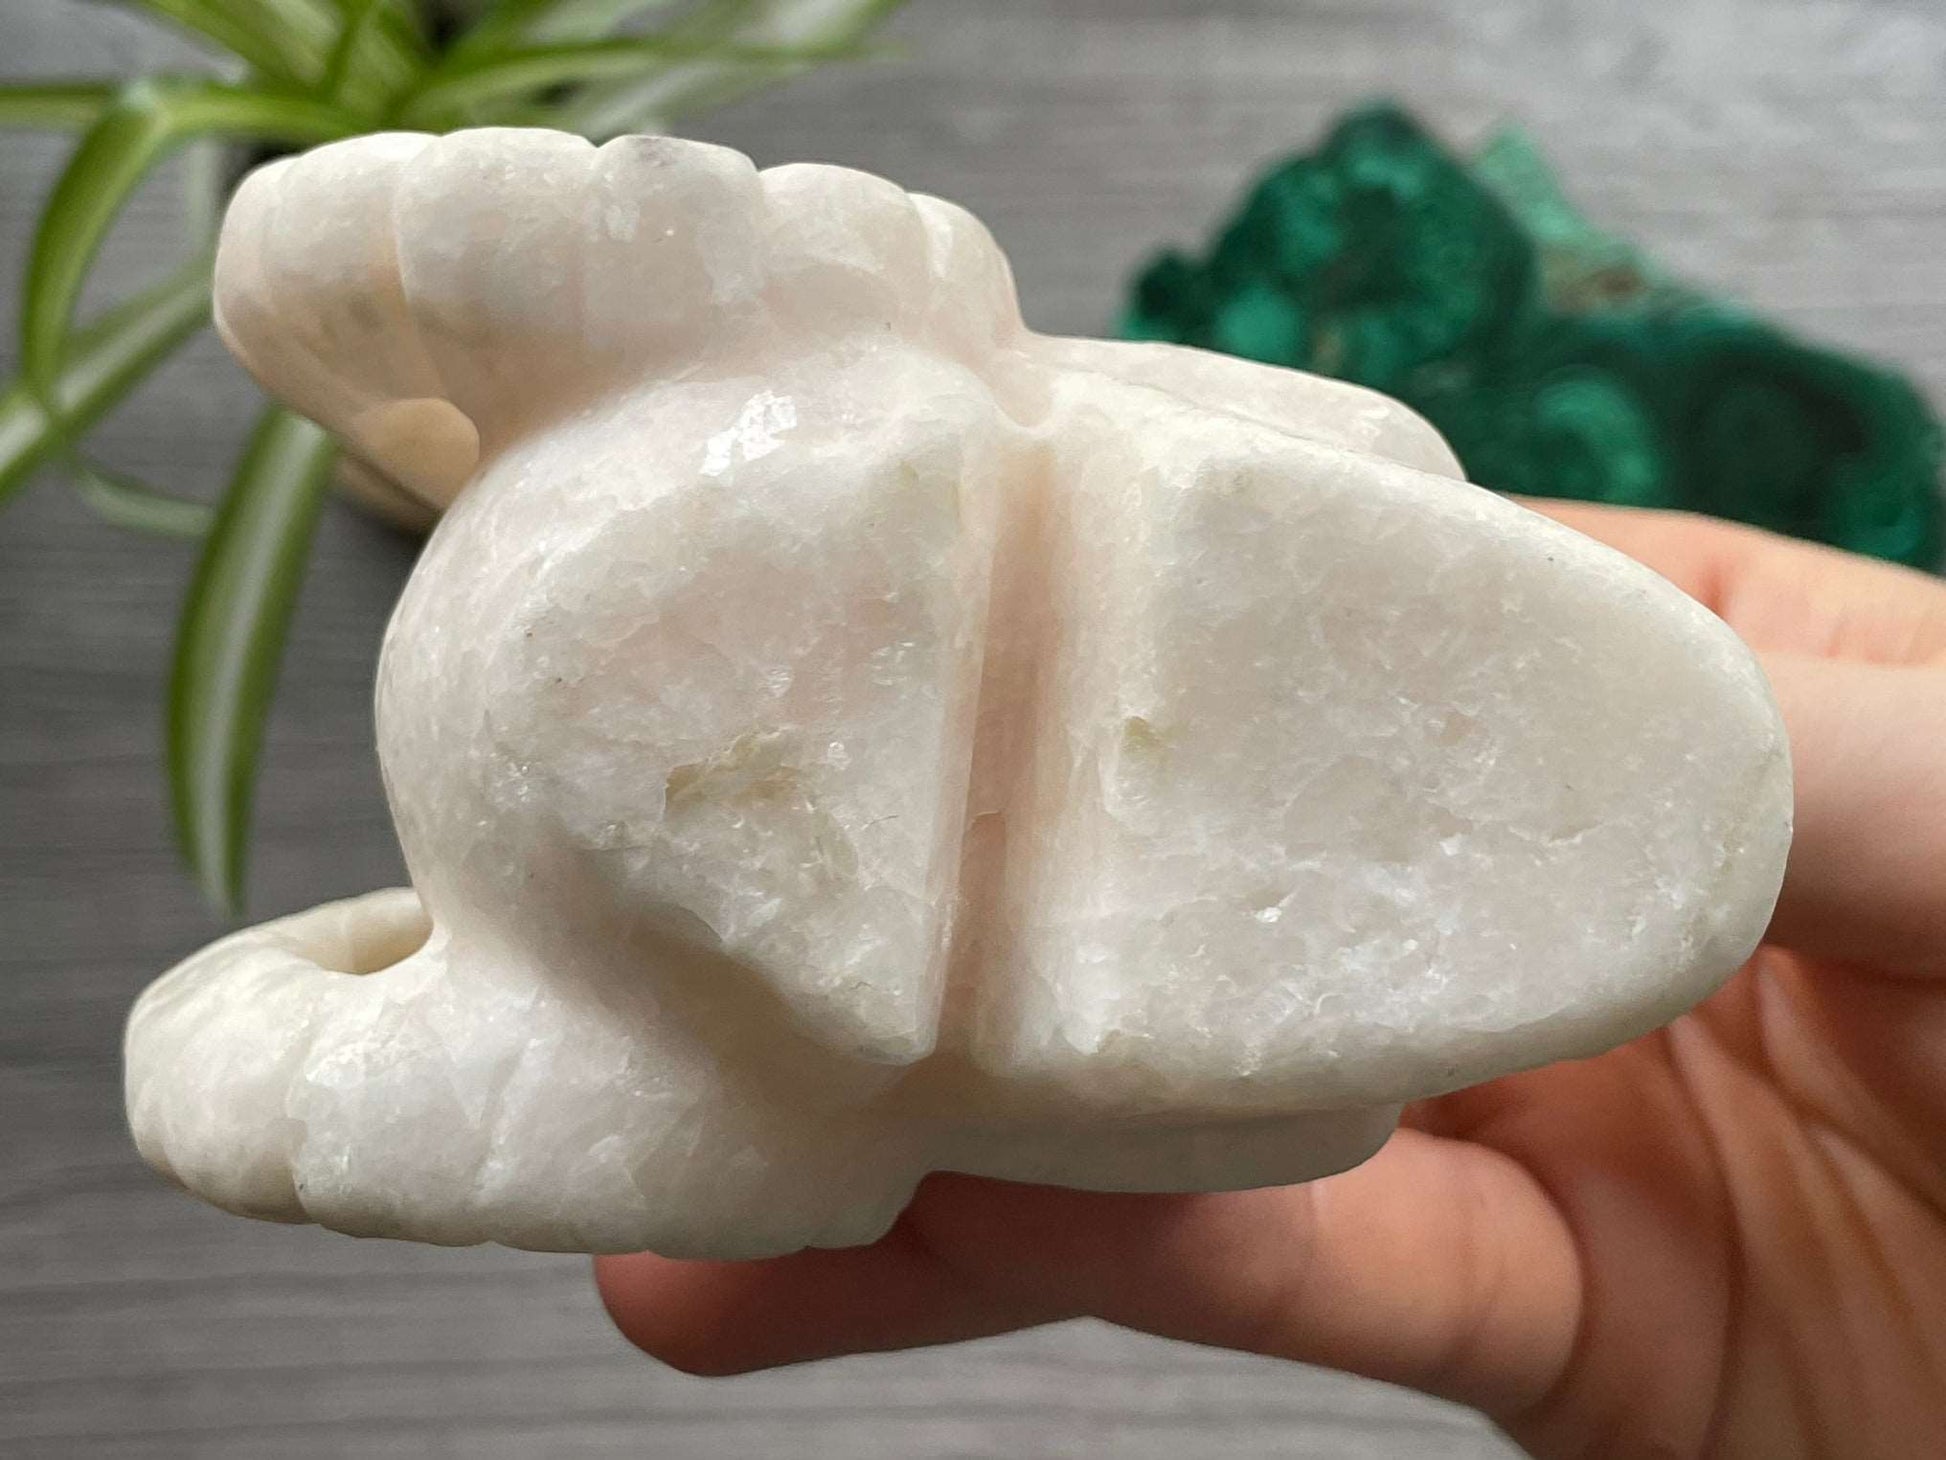 Pictured is a demon skull with horns carved out of white calcite.